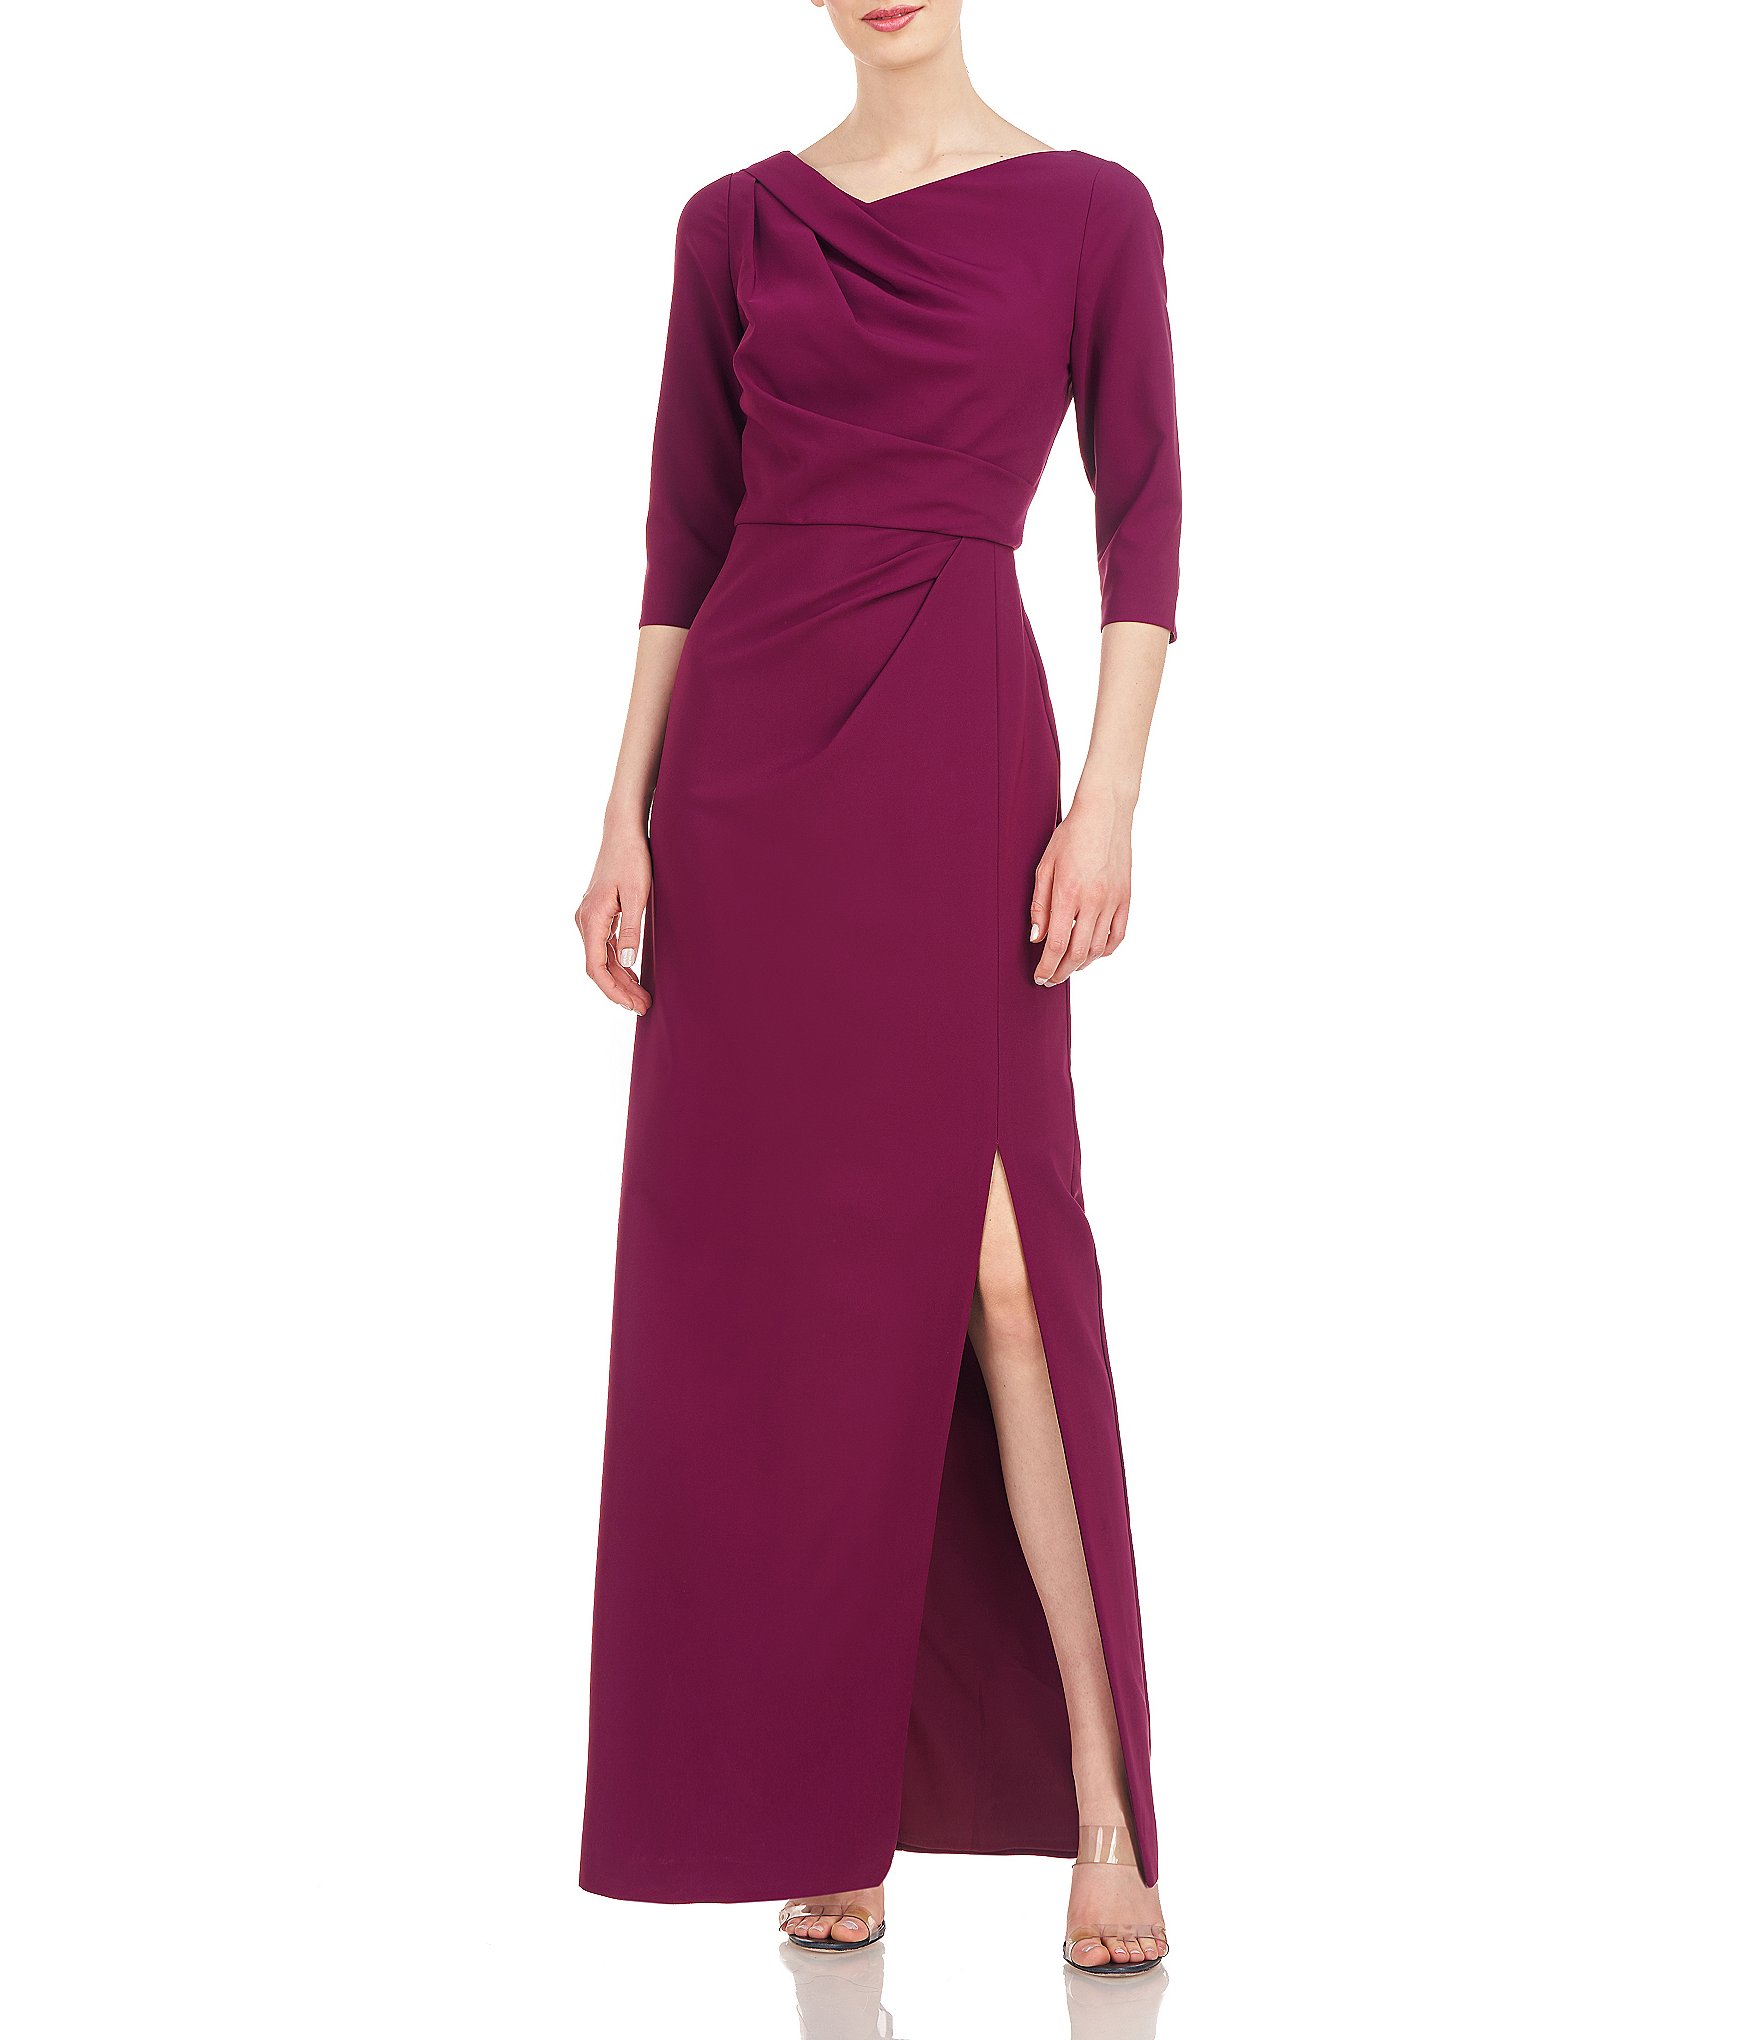 Kay Unger Women's Formal Dresses & Evening Gowns